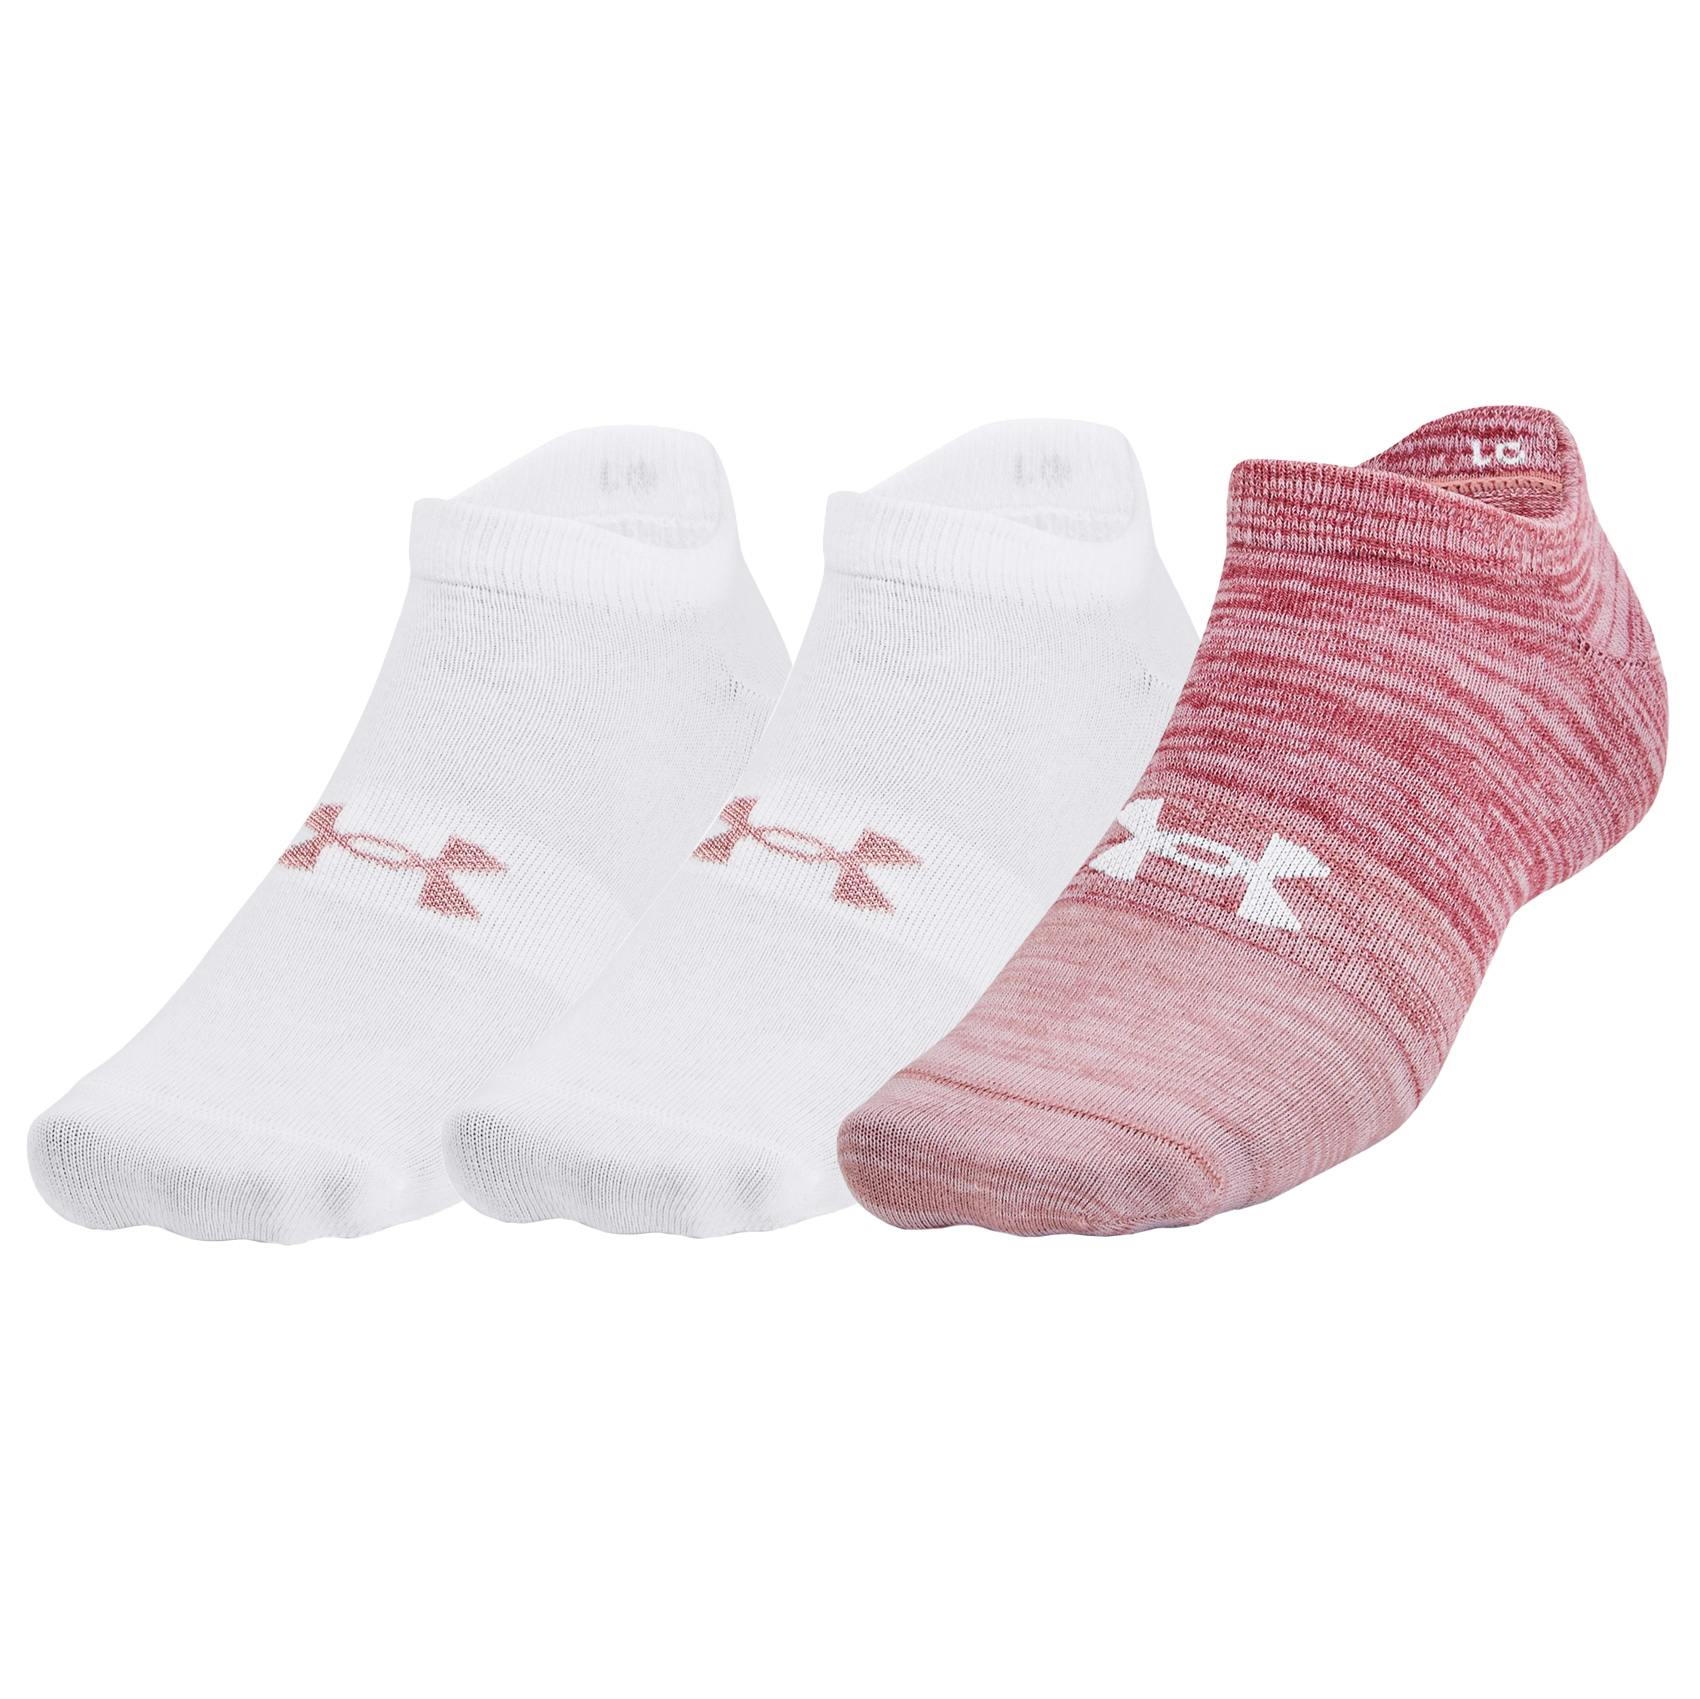 Picture of Under Armour UA Essentials 3-Pack No Show Socks - Pink Elixir/White/White